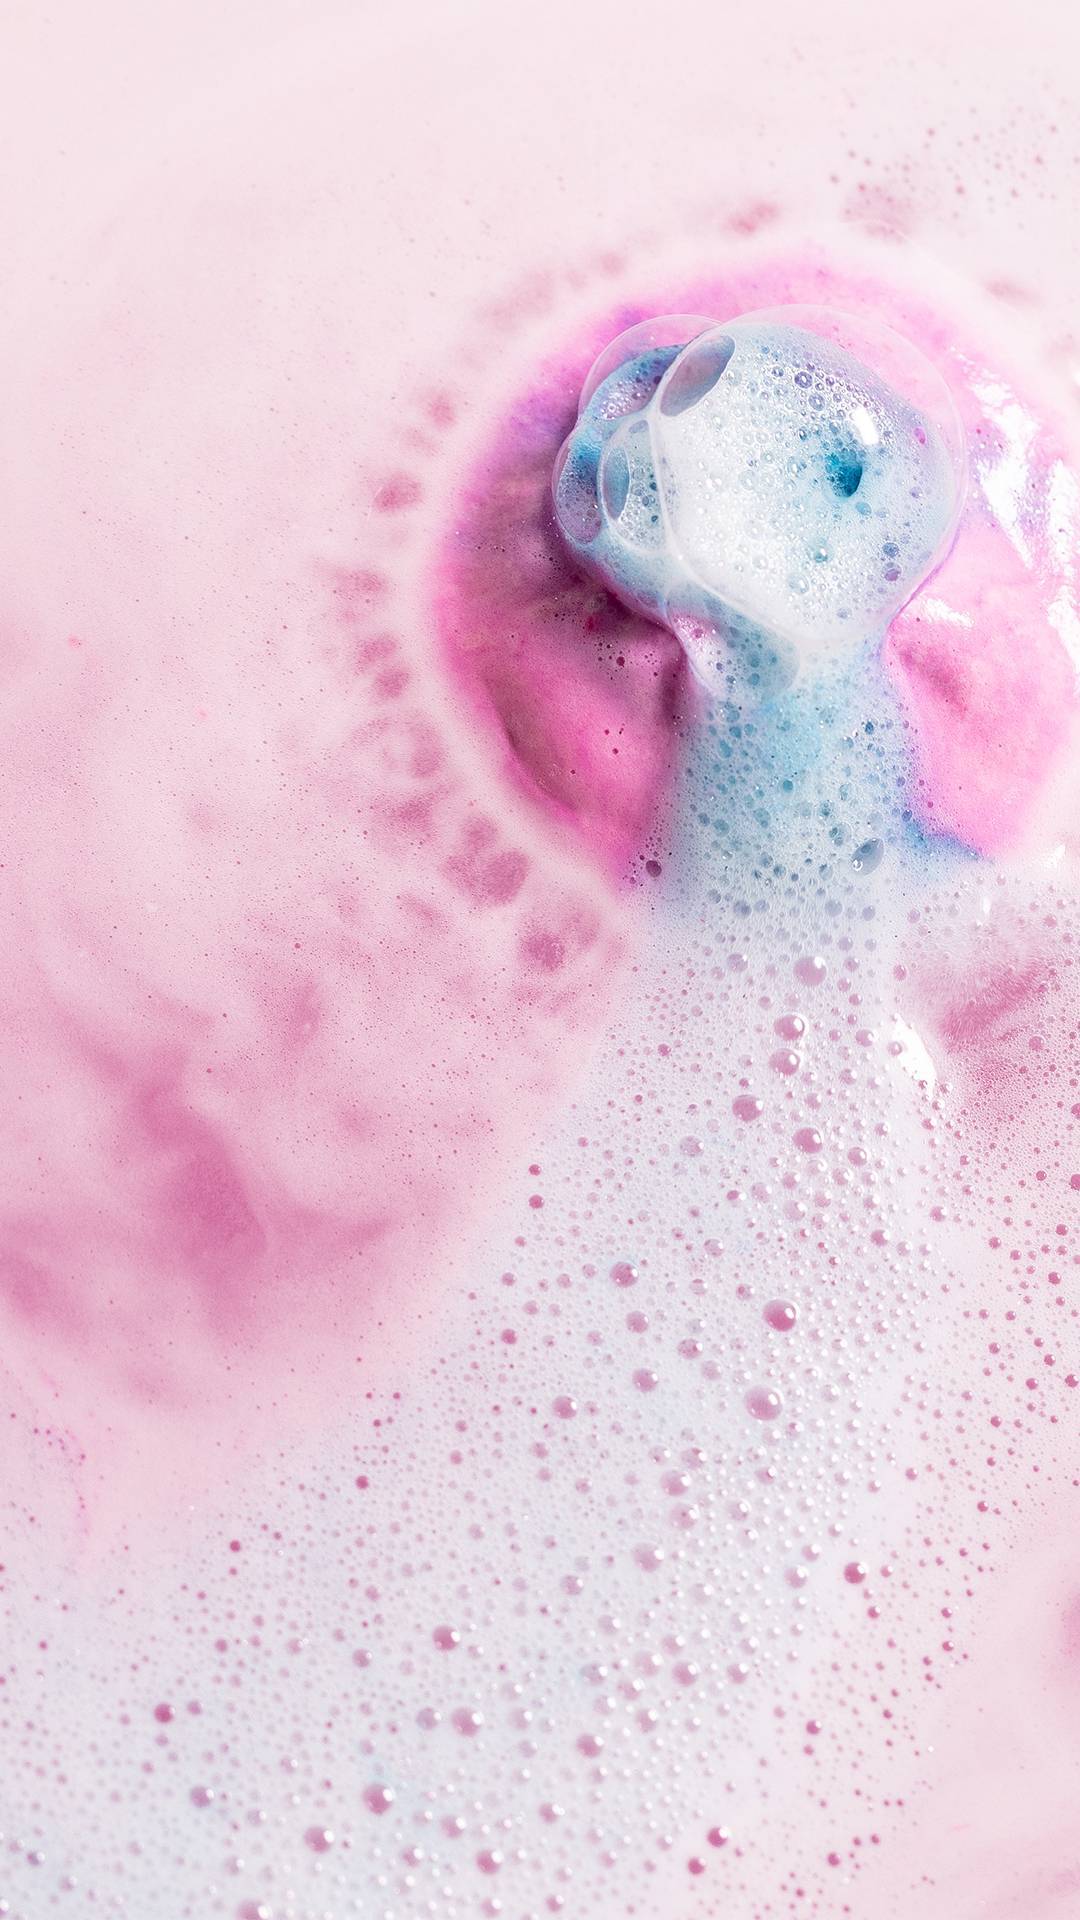 The Twilight bath bomb is slowly dissolving dispersing a thick blanket of delicate pink and purple velvety foam with a burst of blue in the centre. 